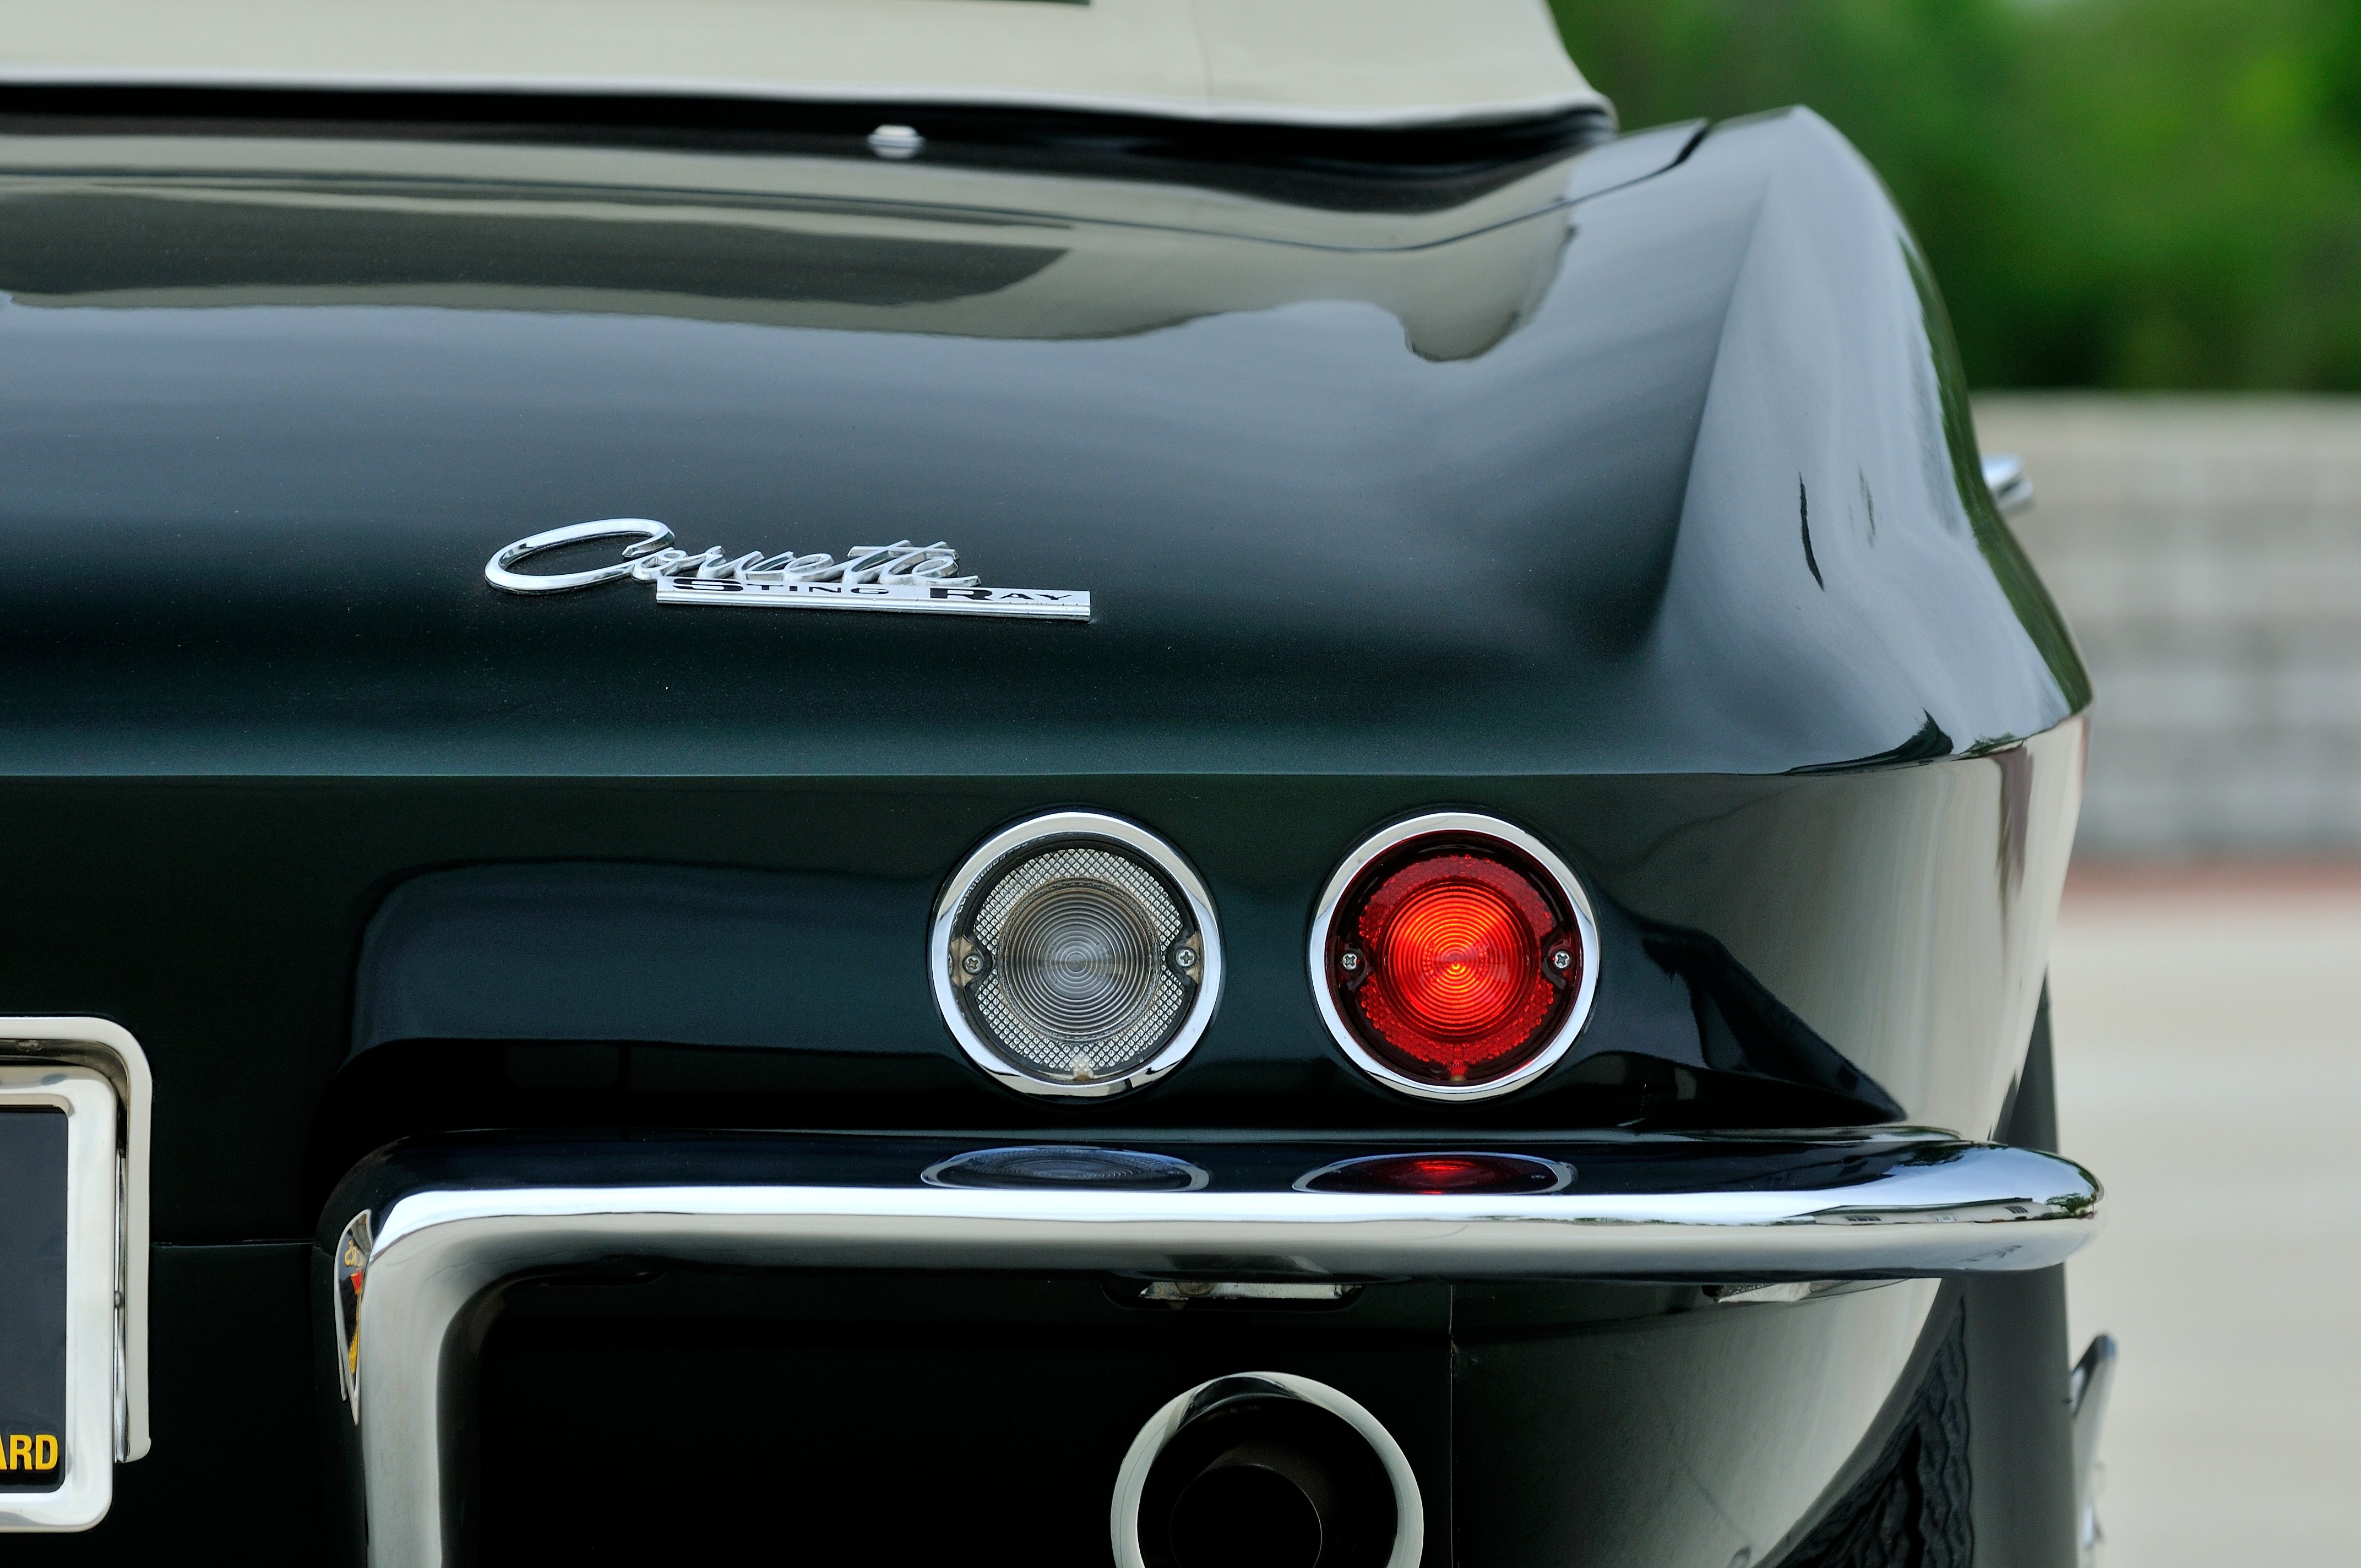 1965, Chevrolet, Corvette, Stingray, Ating, Ray, Muscle, Convertible, Classic, Old, Original, Usa,  23 Wallpaper